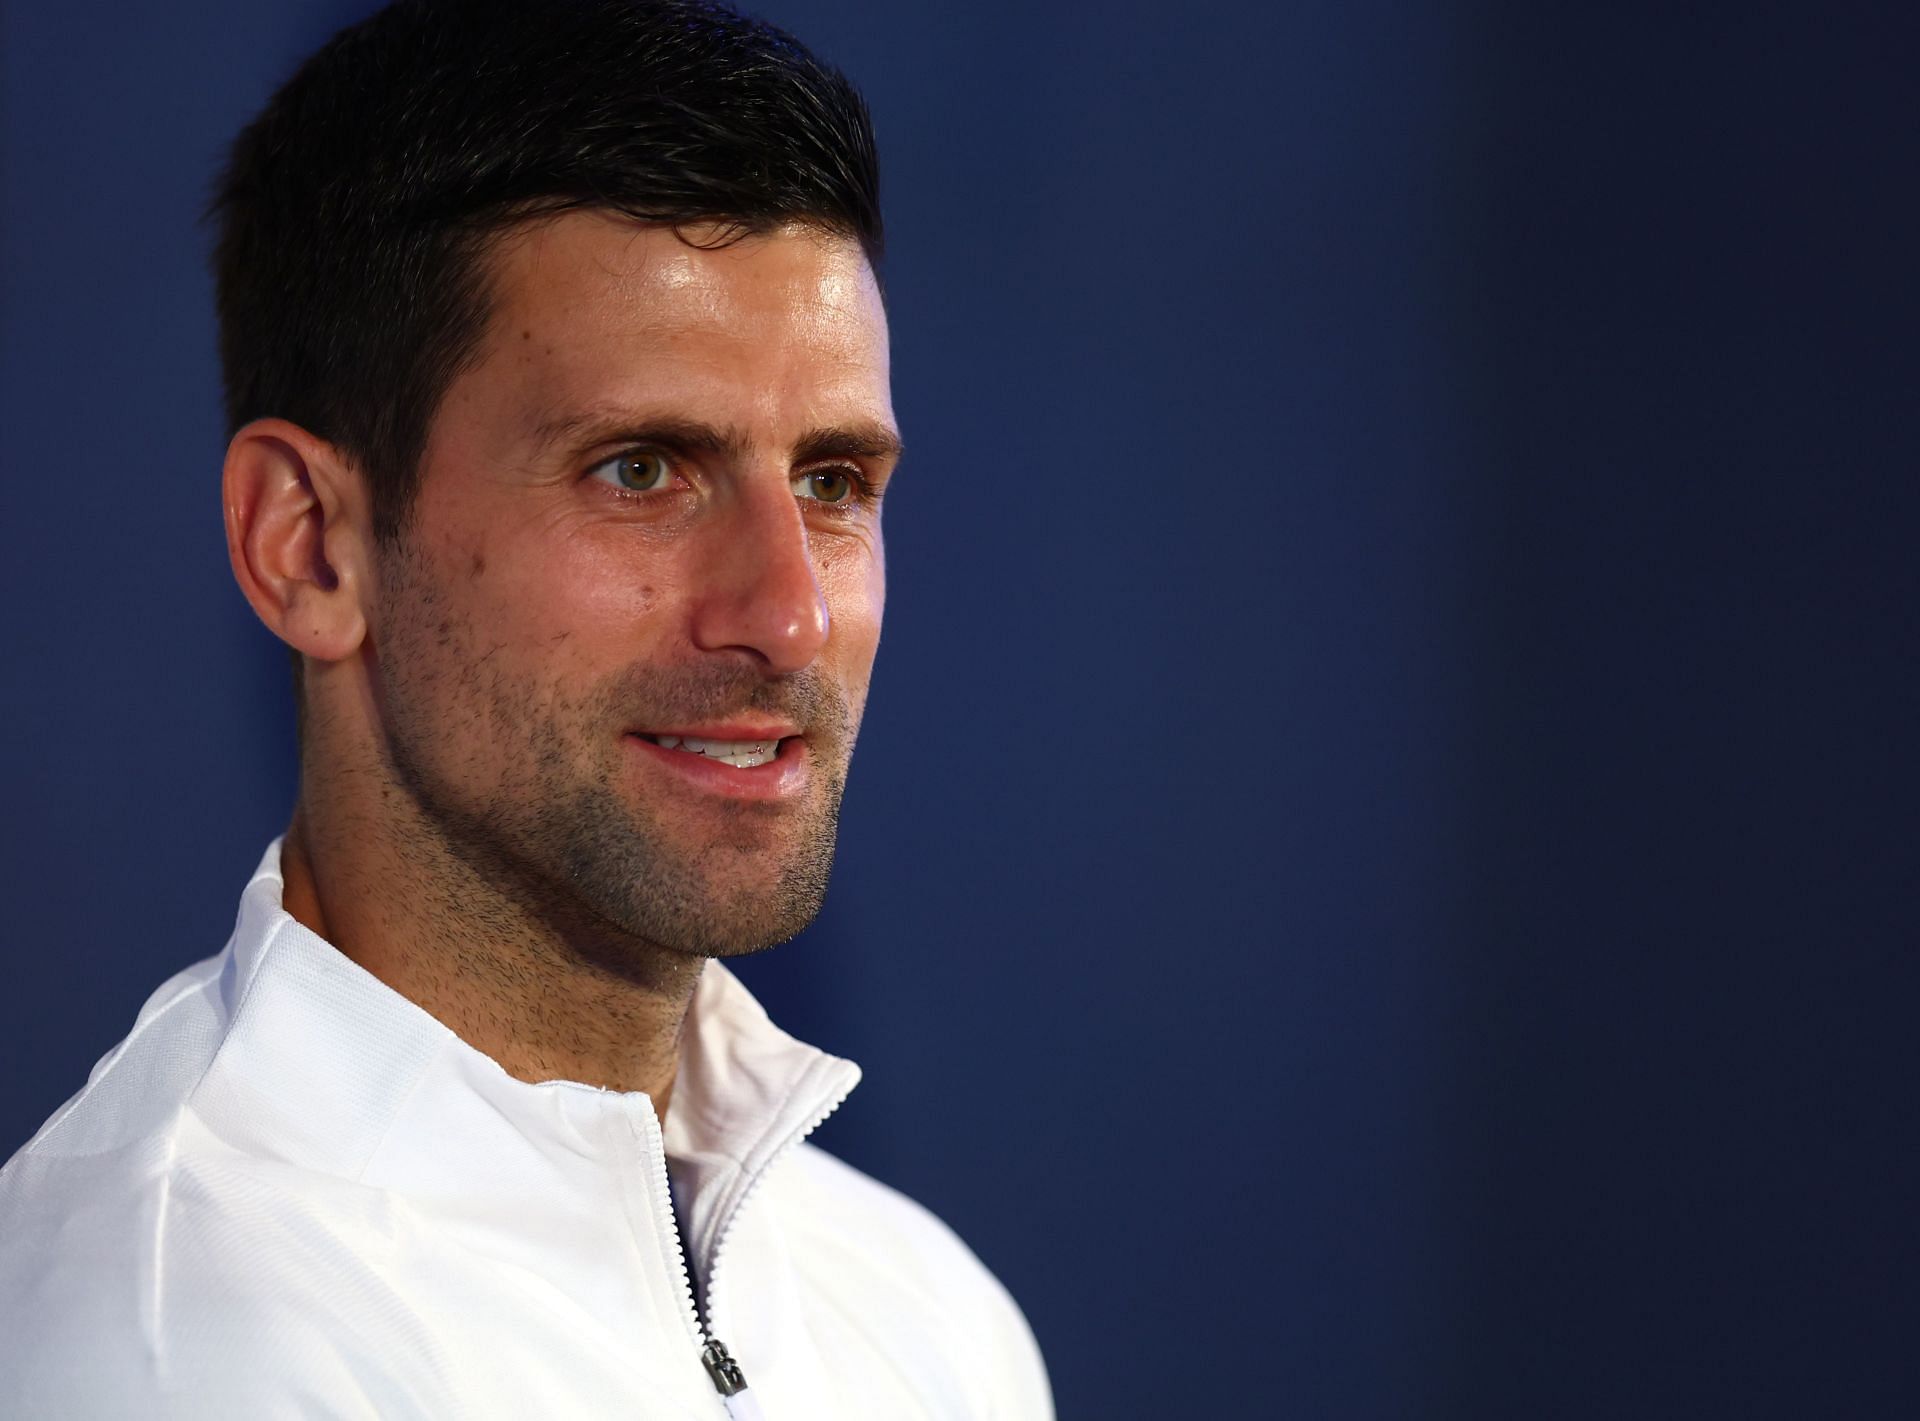 All eyes will be on Novak Djokovic as he returns to action at the Monte-Carlo Masters